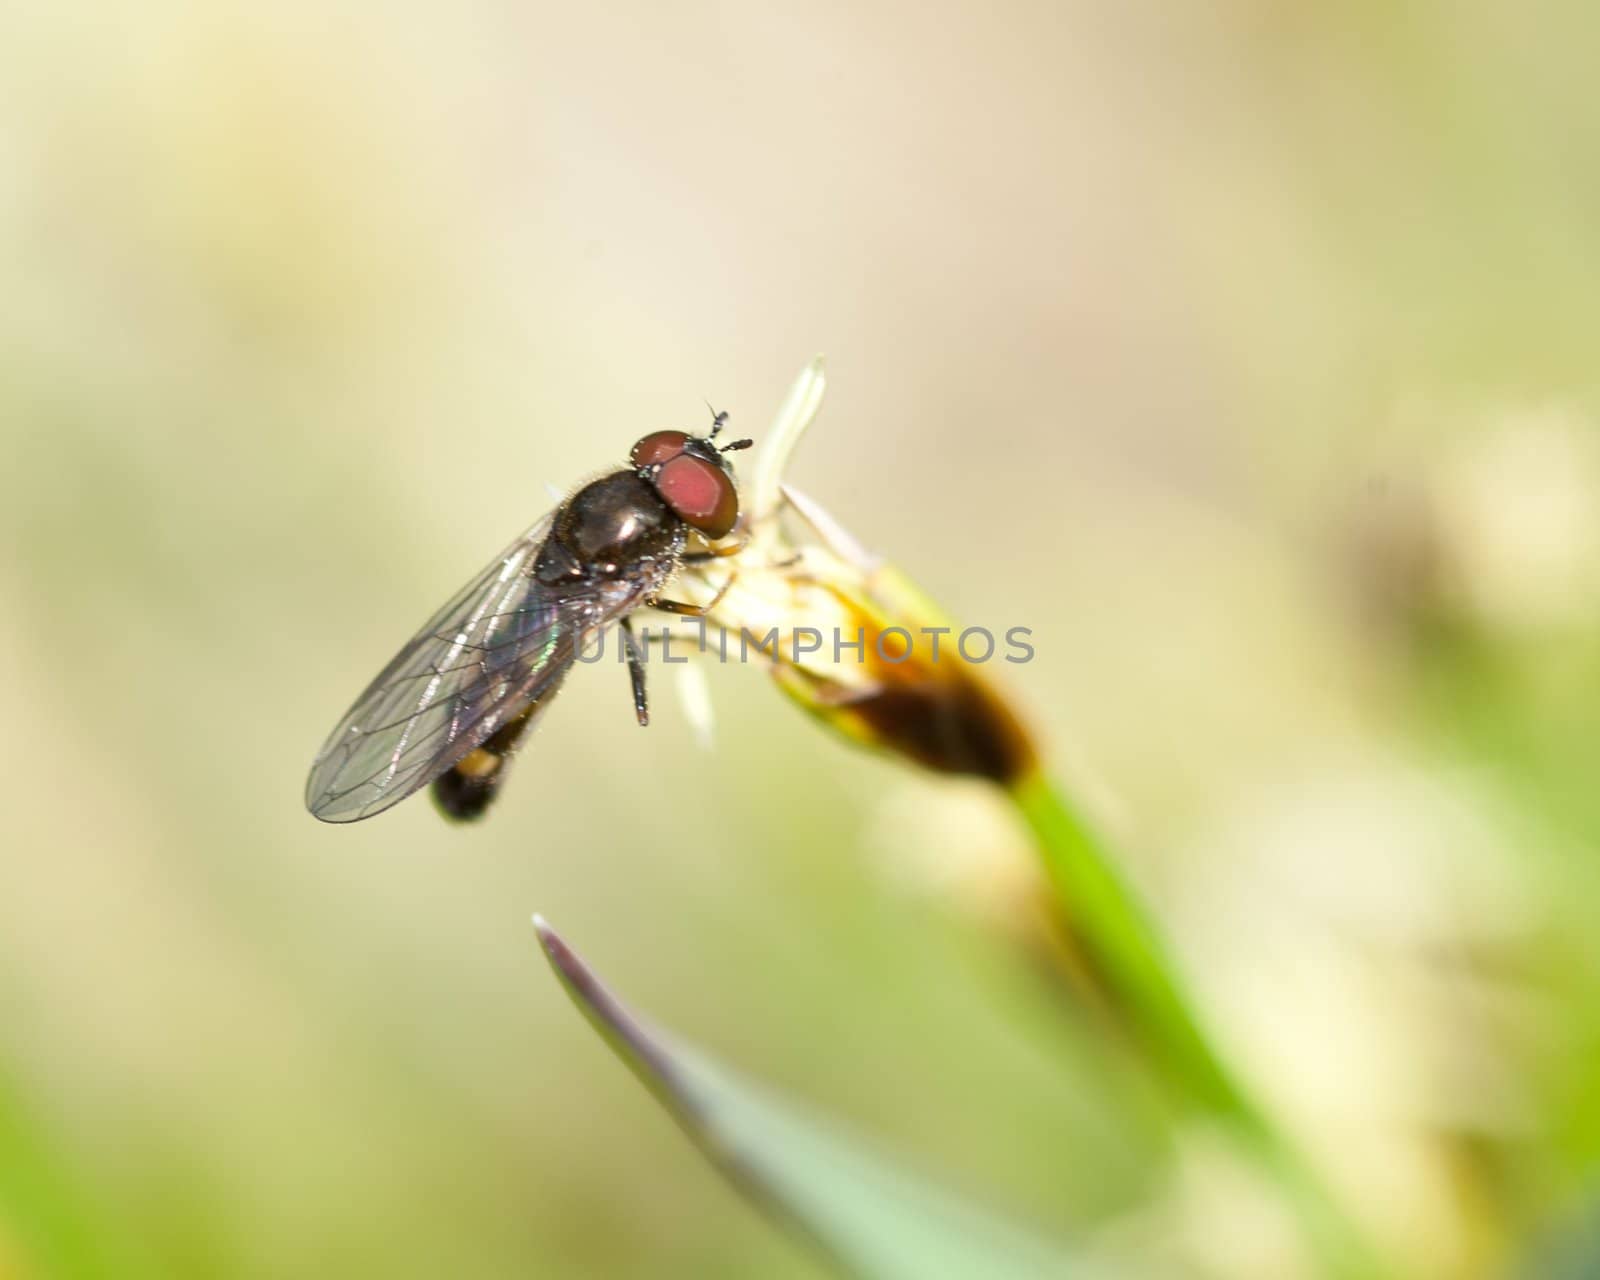 Platycheirus by kenneththunes